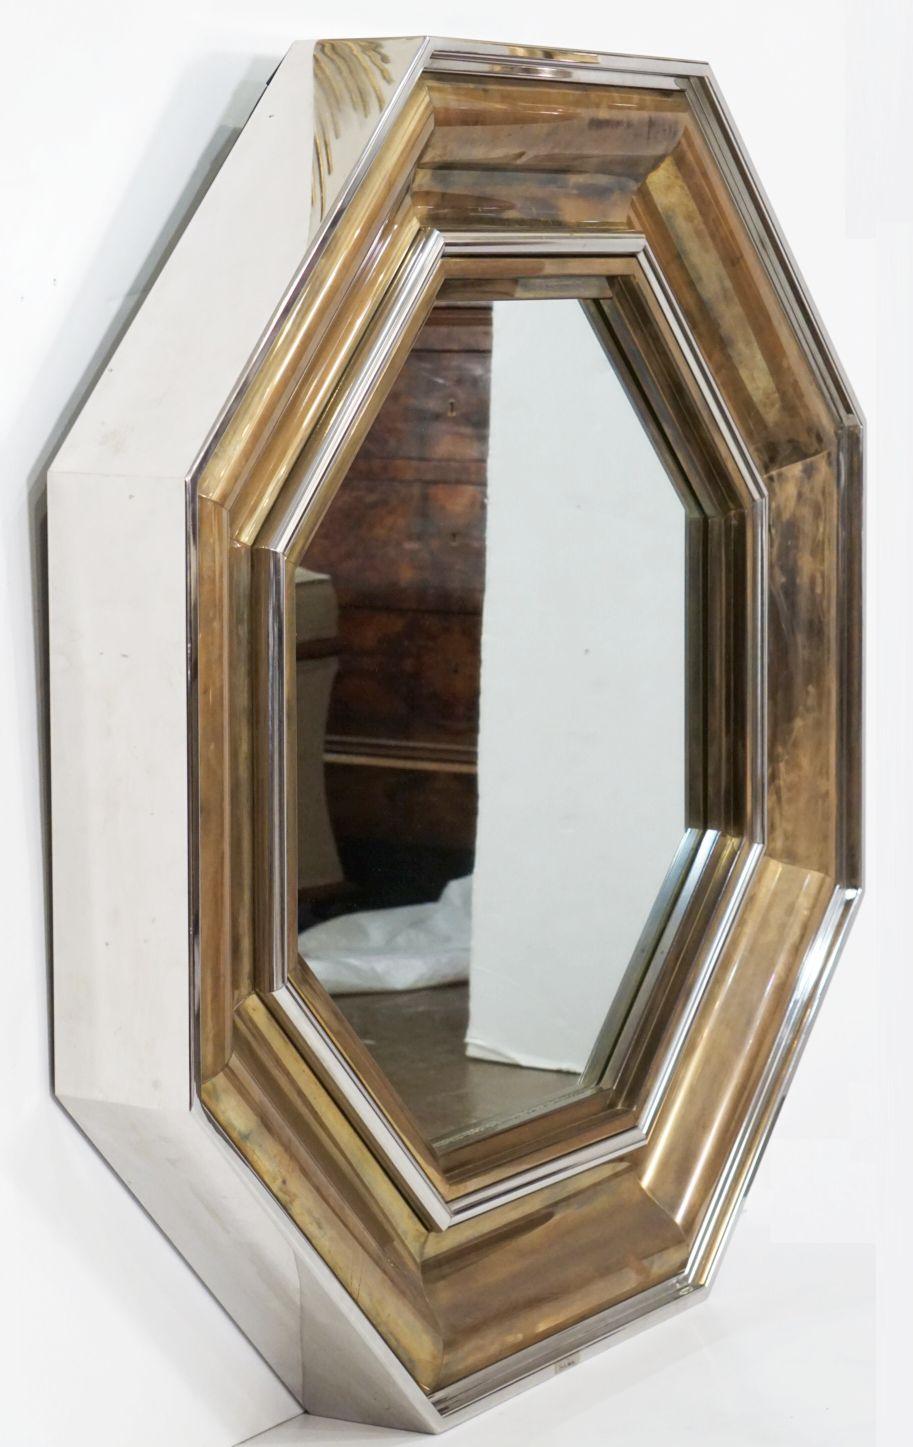 A beautiful large Italian octagonal brass and chrome mirror - designed by the famed Italian architect, Sandro Petti, for the French design house, Maison Jansen, and produced by L'angolo Metallarte, in the 1970s.
The frame featuring stylishly chic